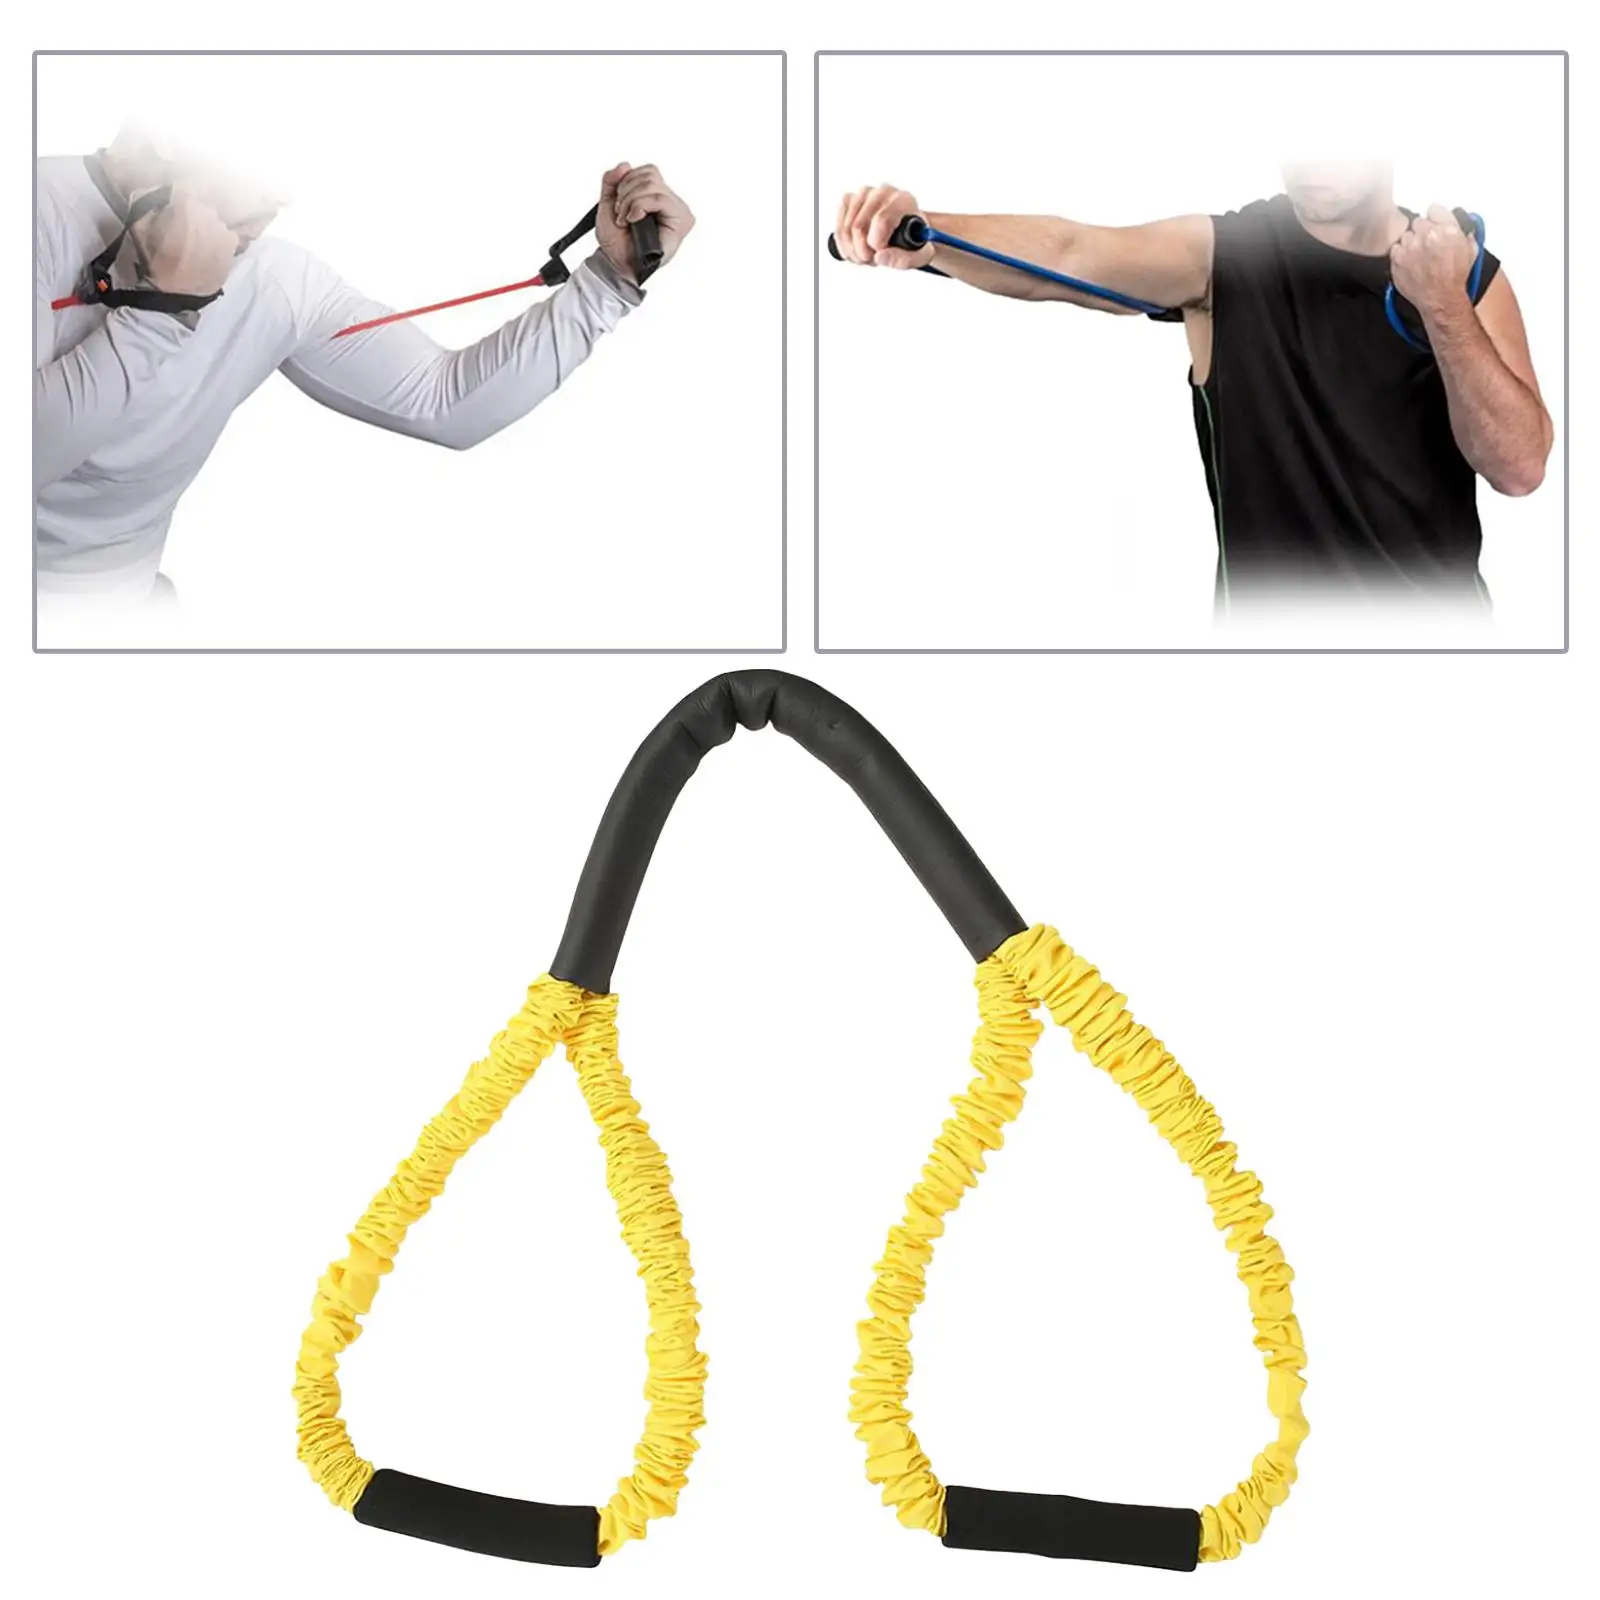 Boxing Resistance Bands Pilates Strength Training Training Exercise Bands